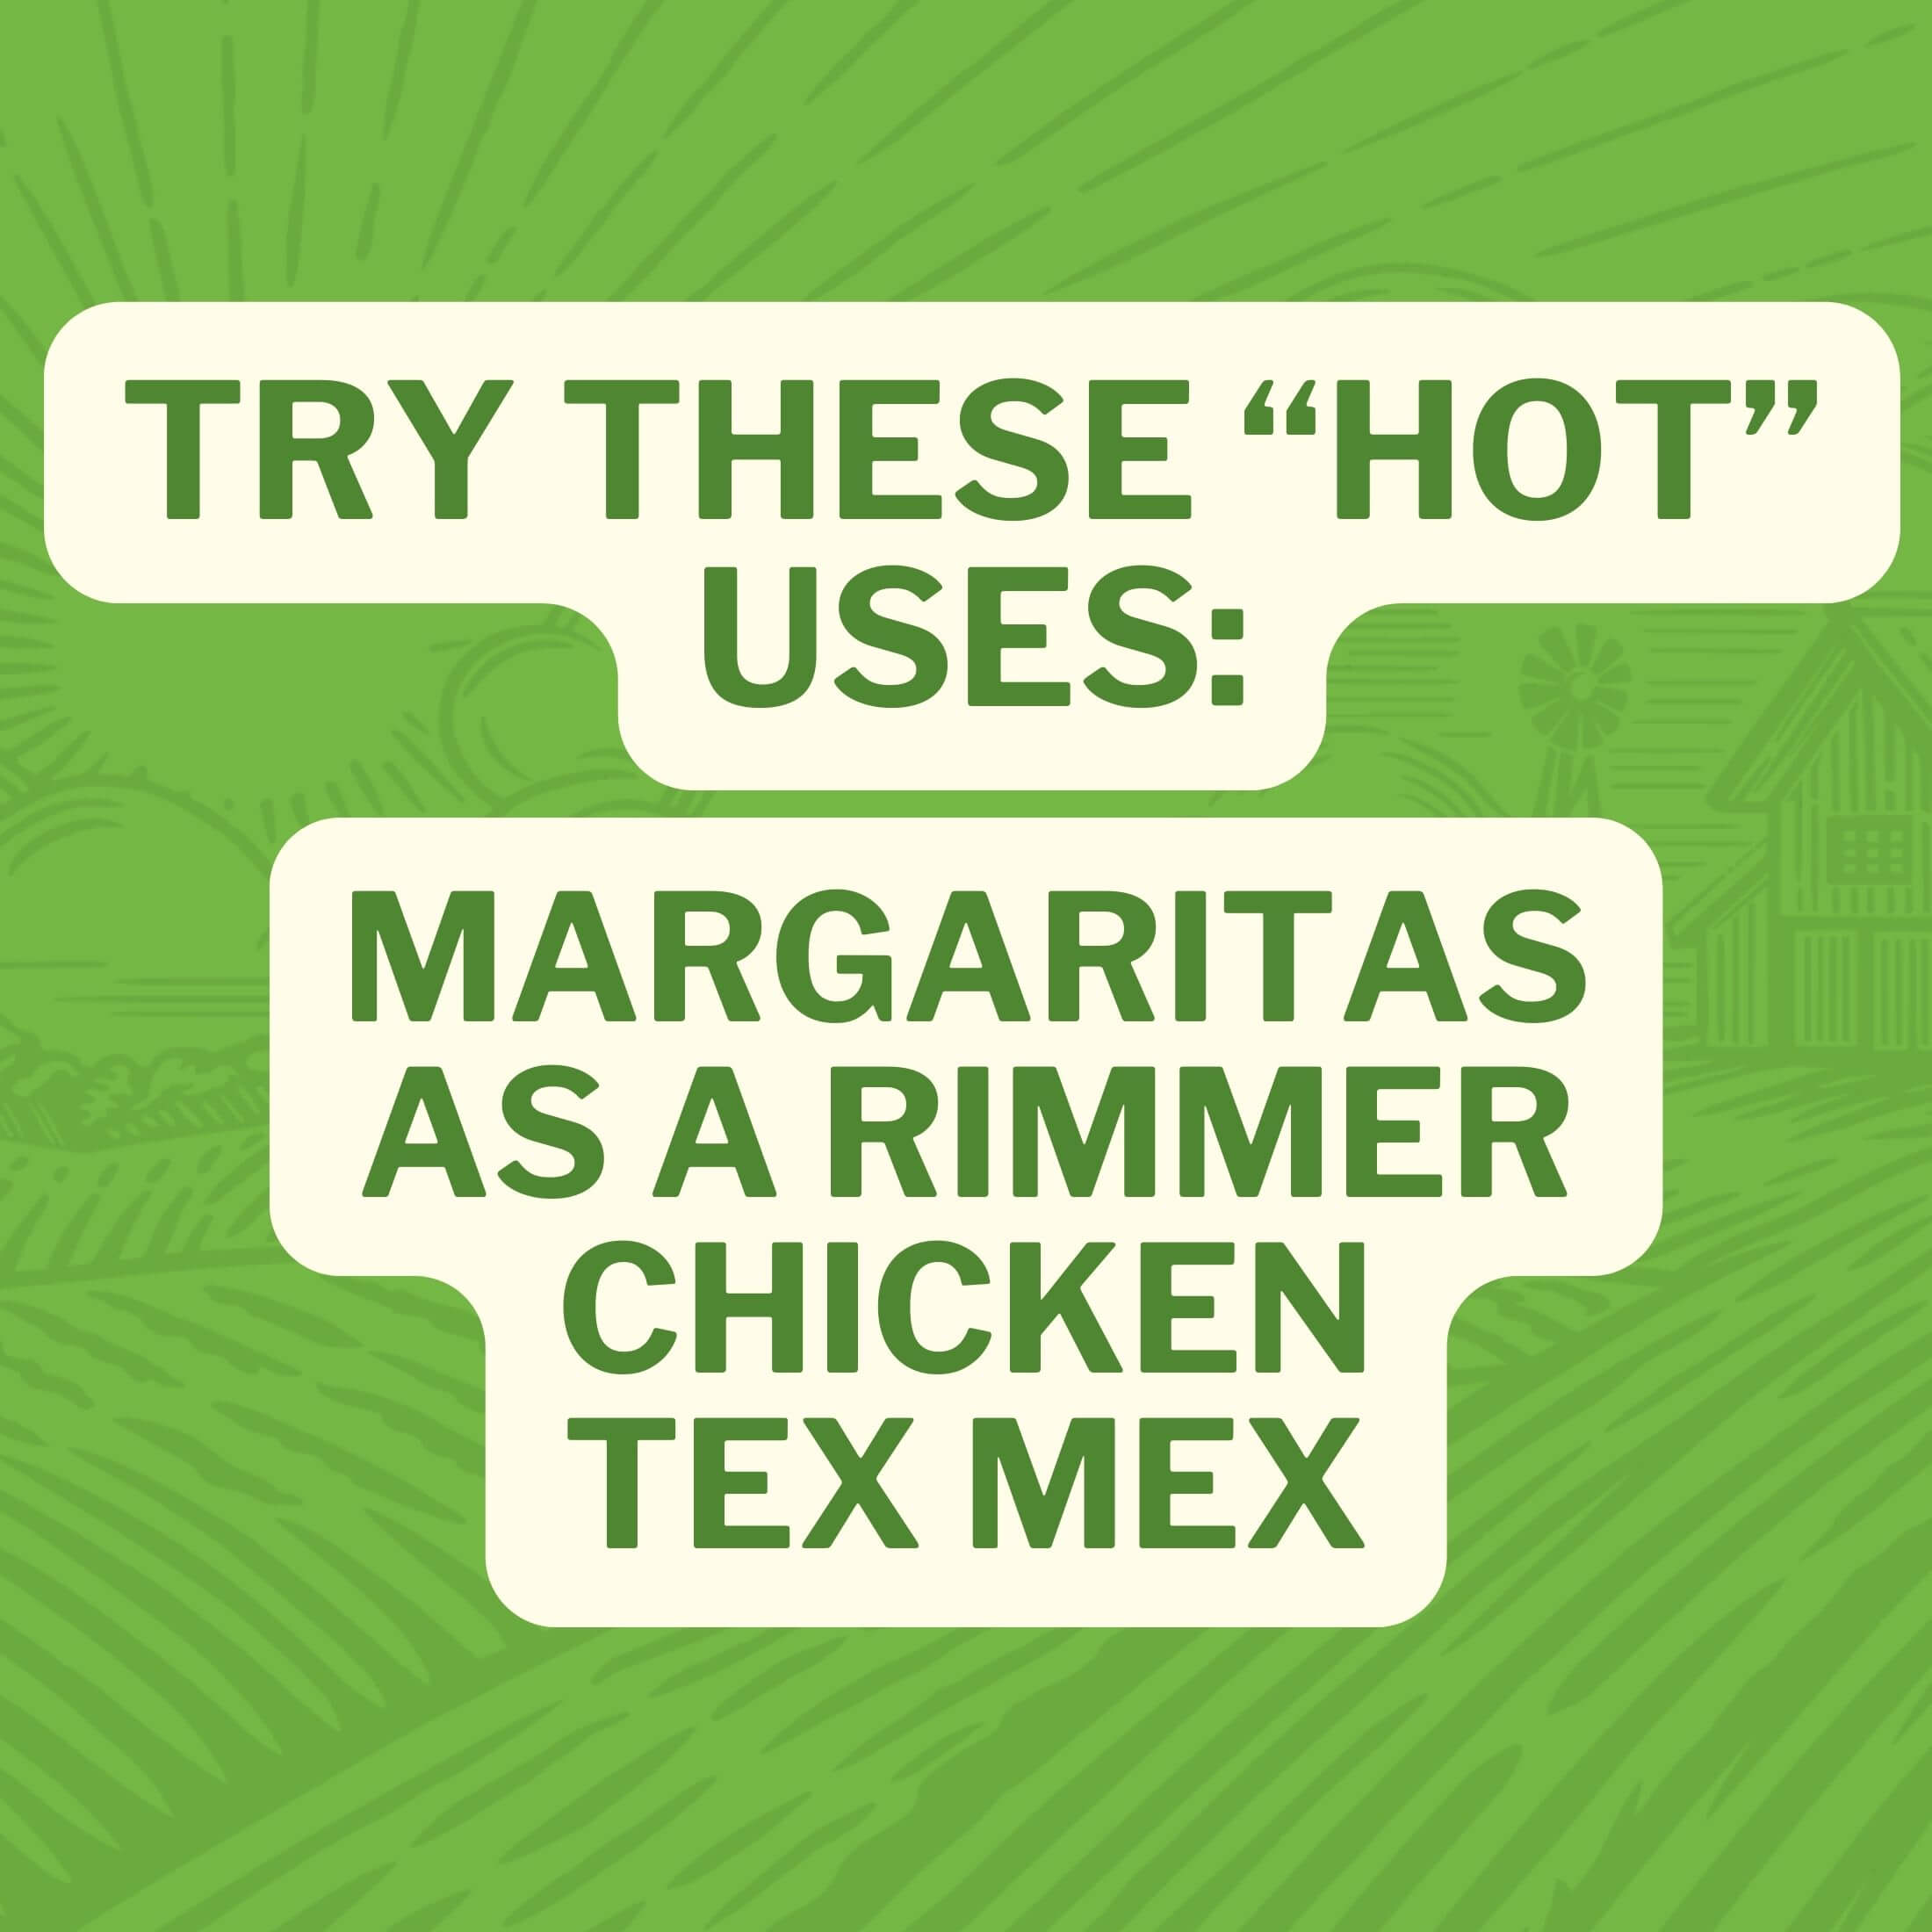 Try These "Hot" Uses: Margaritas, As a Cocktail Rimmer, Chicken, Tex-Mex